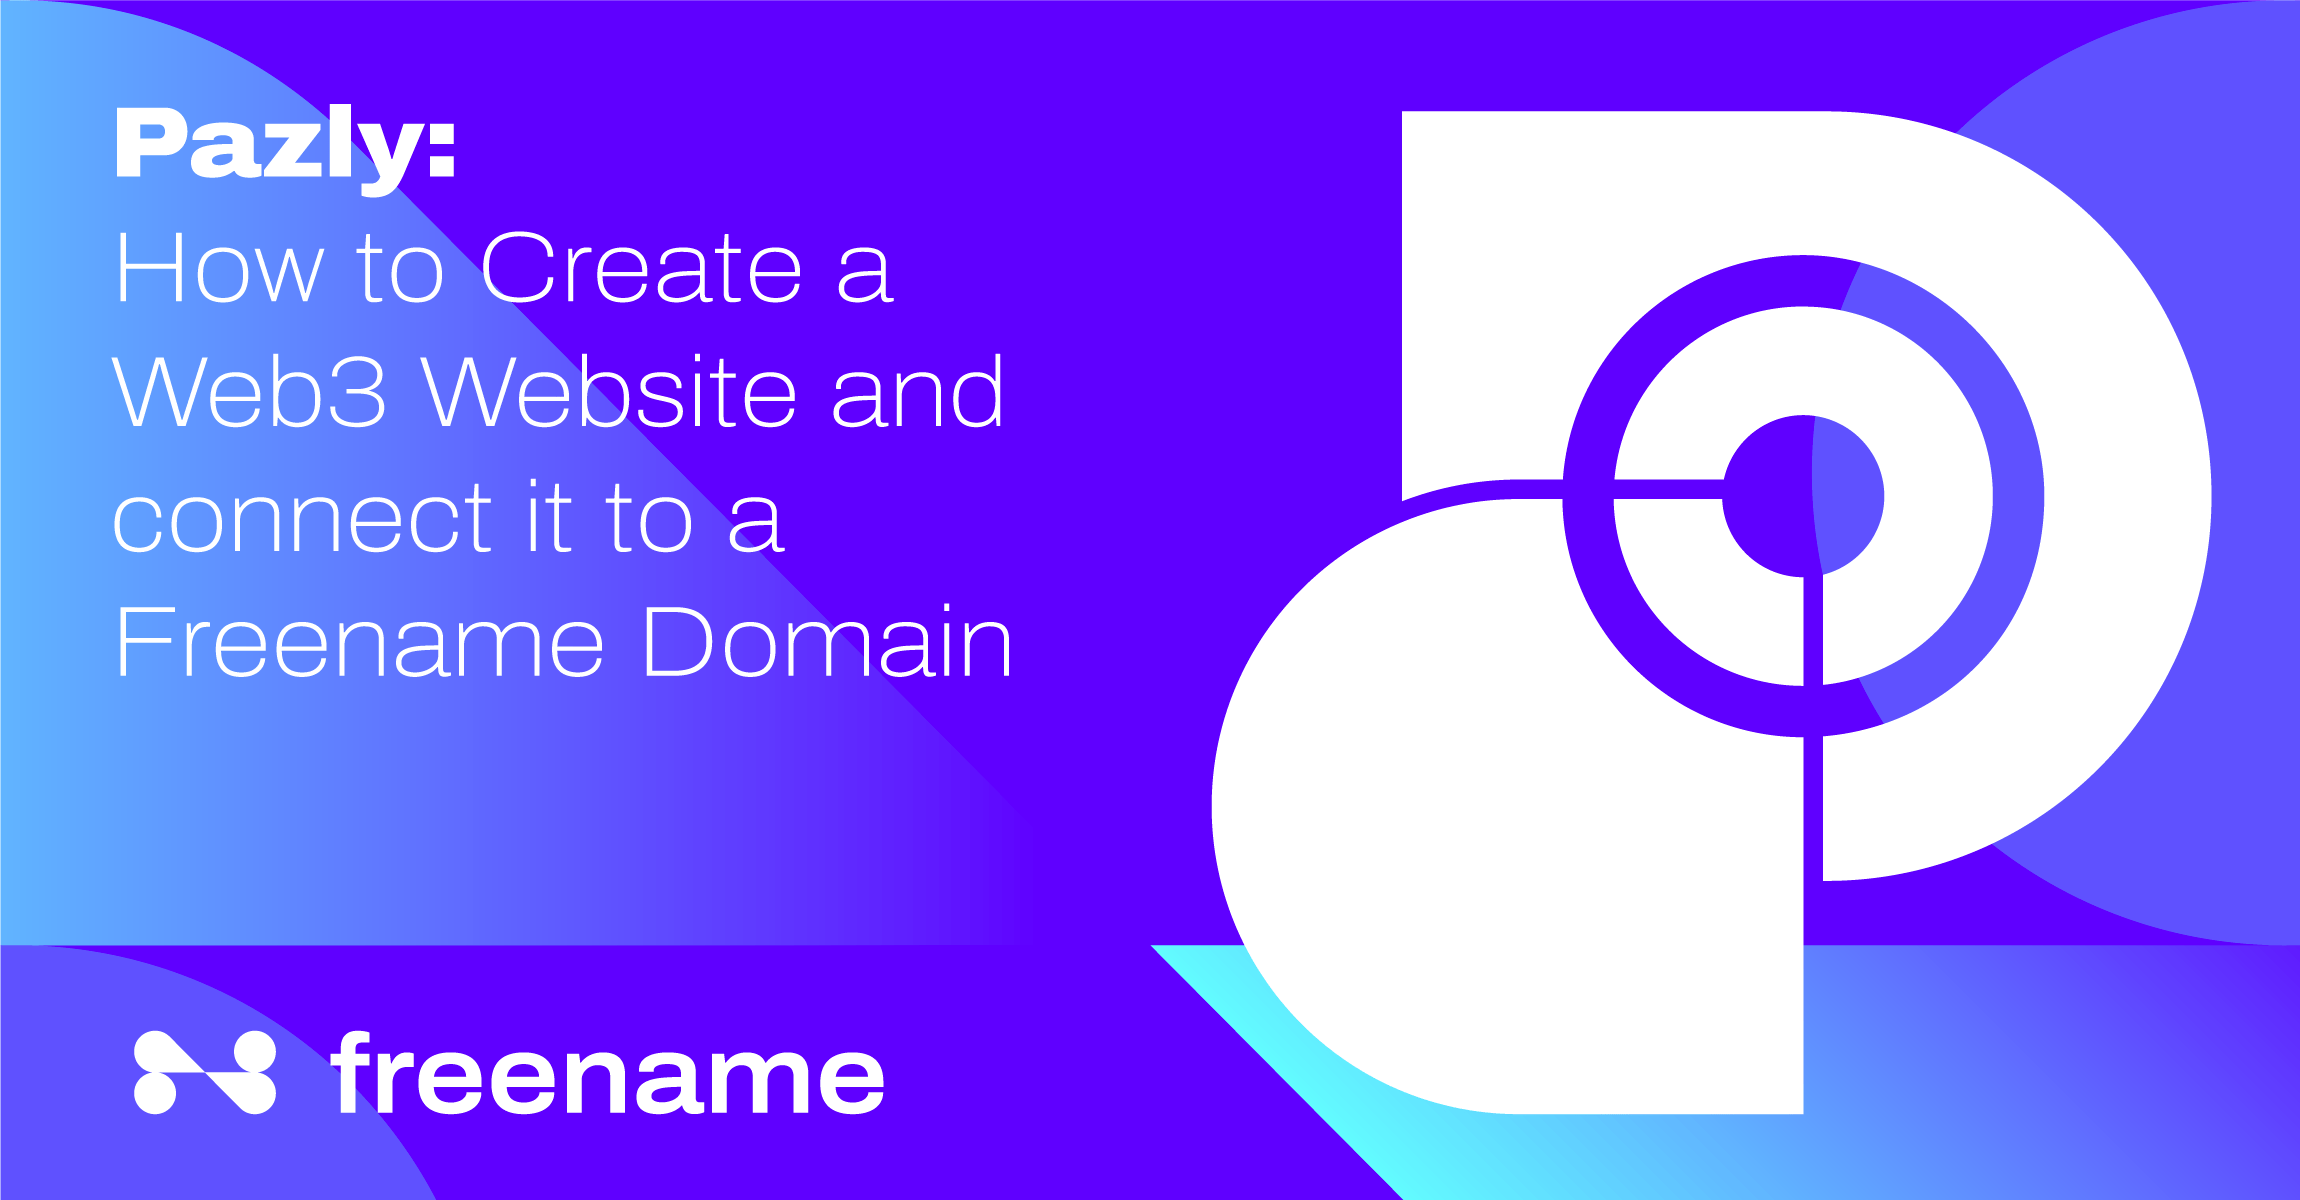 Pazly: How to Create a Web3 Website and connect it to a Freename Domain